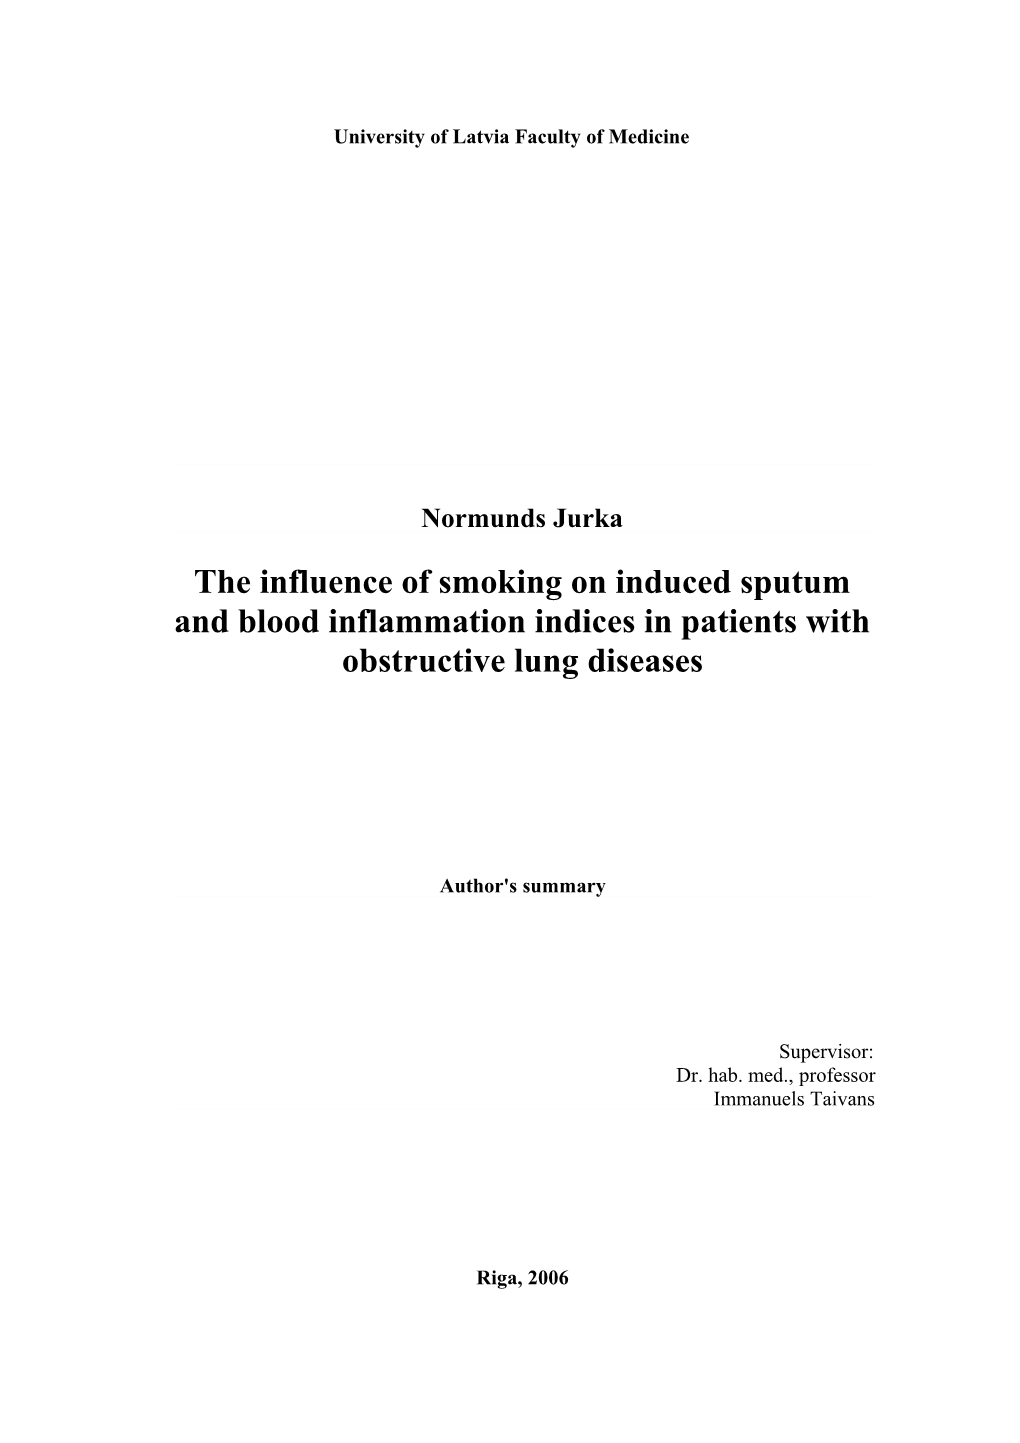 Normunds Jurka. the Influence of Smoking on Induced Sputum and Blood Inflammation Indices